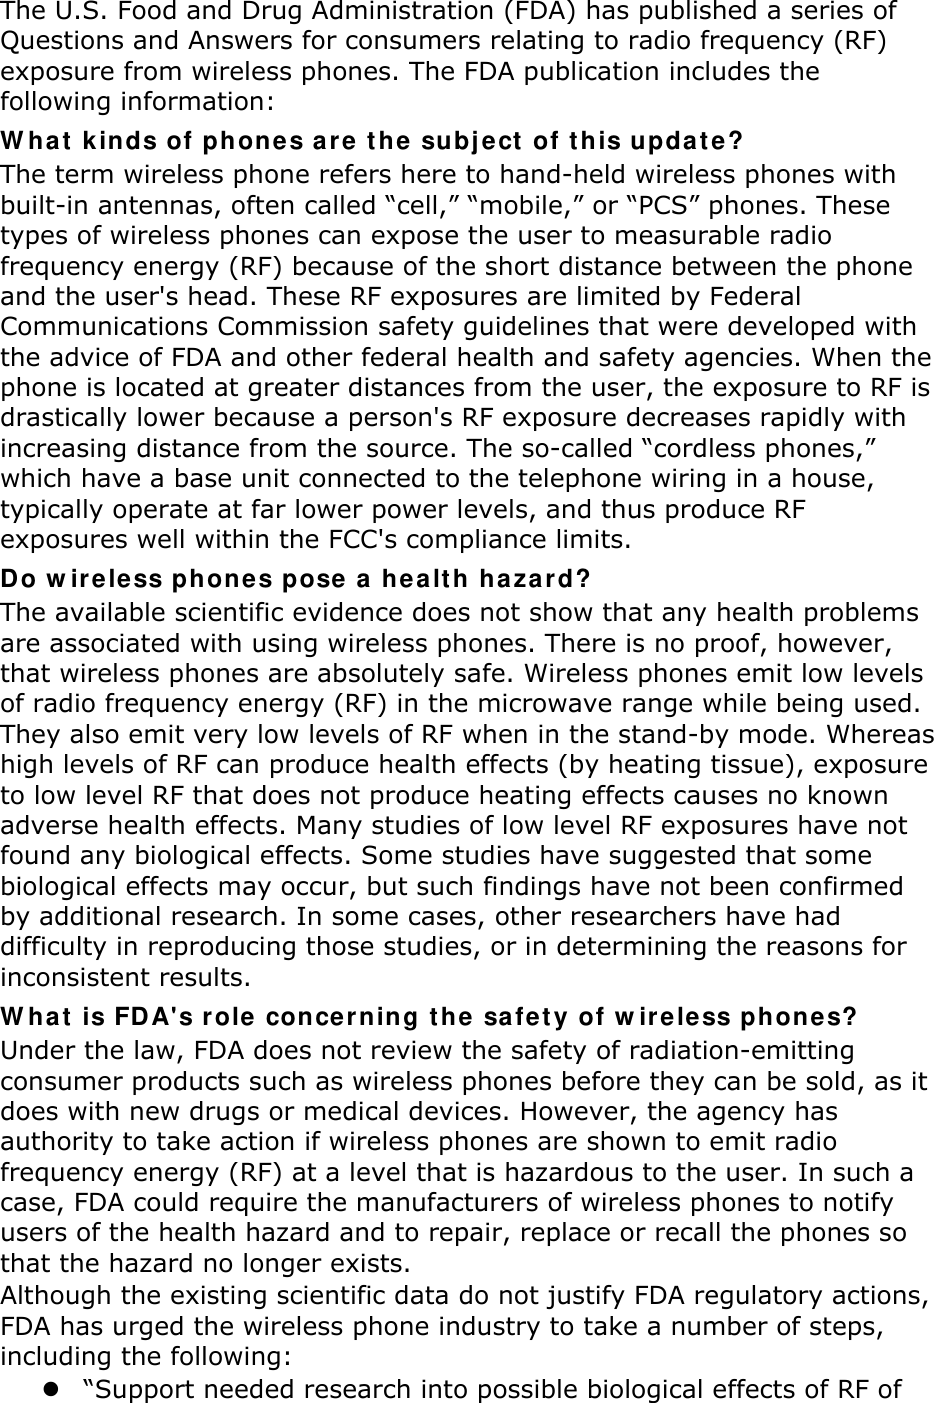 The U.S. Food and Drug Administration (FDA) has published a series of Questions and Answers for consumers relating to radio frequency (RF) exposure from wireless phones. The FDA publication includes the following information: What kinds of phones are the subject of this update? The term wireless phone refers here to hand-held wireless phones with built-in antennas, often called “cell,” “mobile,” or “PCS” phones. These types of wireless phones can expose the user to measurable radio frequency energy (RF) because of the short distance between the phone and the user&apos;s head. These RF exposures are limited by Federal Communications Commission safety guidelines that were developed with the advice of FDA and other federal health and safety agencies. When the phone is located at greater distances from the user, the exposure to RF is drastically lower because a person&apos;s RF exposure decreases rapidly with increasing distance from the source. The so-called “cordless phones,” which have a base unit connected to the telephone wiring in a house, typically operate at far lower power levels, and thus produce RF exposures well within the FCC&apos;s compliance limits. Do wireless phones pose a health hazard? The available scientific evidence does not show that any health problems are associated with using wireless phones. There is no proof, however, that wireless phones are absolutely safe. Wireless phones emit low levels of radio frequency energy (RF) in the microwave range while being used. They also emit very low levels of RF when in the stand-by mode. Whereas high levels of RF can produce health effects (by heating tissue), exposure to low level RF that does not produce heating effects causes no known adverse health effects. Many studies of low level RF exposures have not found any biological effects. Some studies have suggested that some biological effects may occur, but such findings have not been confirmed by additional research. In some cases, other researchers have had difficulty in reproducing those studies, or in determining the reasons for inconsistent results. What is FDA&apos;s role concerning the safety of wireless phones? Under the law, FDA does not review the safety of radiation-emitting consumer products such as wireless phones before they can be sold, as it does with new drugs or medical devices. However, the agency has authority to take action if wireless phones are shown to emit radio frequency energy (RF) at a level that is hazardous to the user. In such a case, FDA could require the manufacturers of wireless phones to notify users of the health hazard and to repair, replace or recall the phones so that the hazard no longer exists. Although the existing scientific data do not justify FDA regulatory actions, FDA has urged the wireless phone industry to take a number of steps, including the following: z “Support needed research into possible biological effects of RF of 